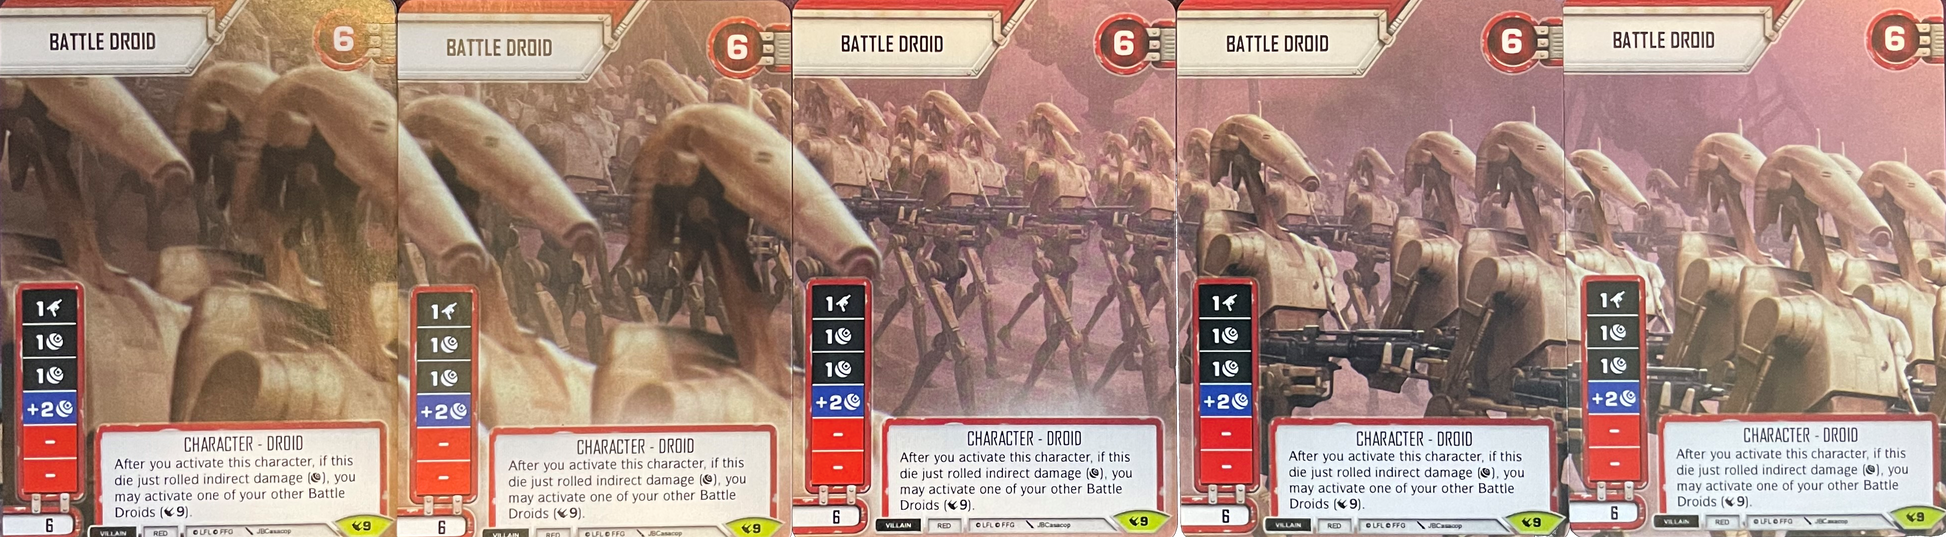 Battle Droid Panoramic Five Card Group (LEG) Promo (Includes dice) Star Wars Destiny Fantasy Flight Games   